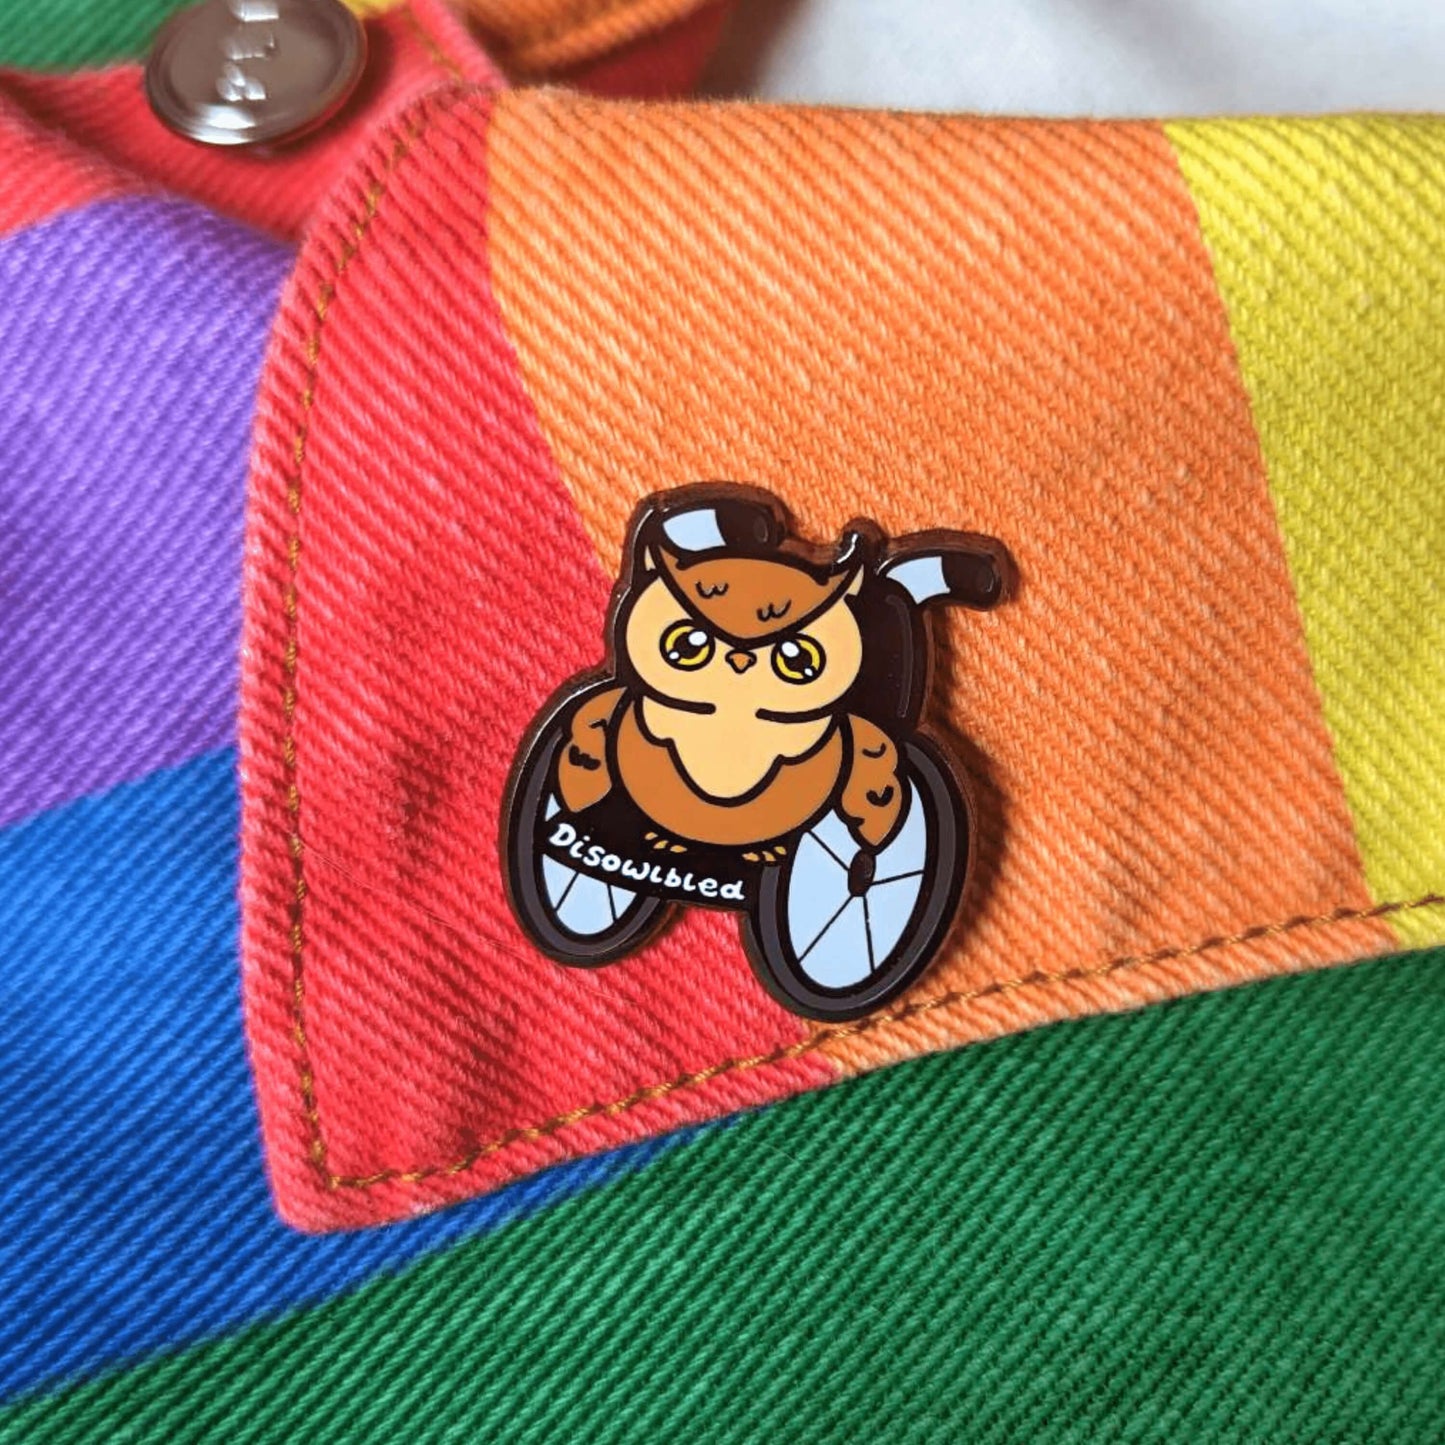 The Disowlbled Enamel Pin - Disabled on the collar of a rainbow denim jacket. A brown tawny owl with yellow eyes sat on a silver and black wheelchair that has white text reading 'disowlbled'. The design is raising awareness for disabilities and invisible illnesses.